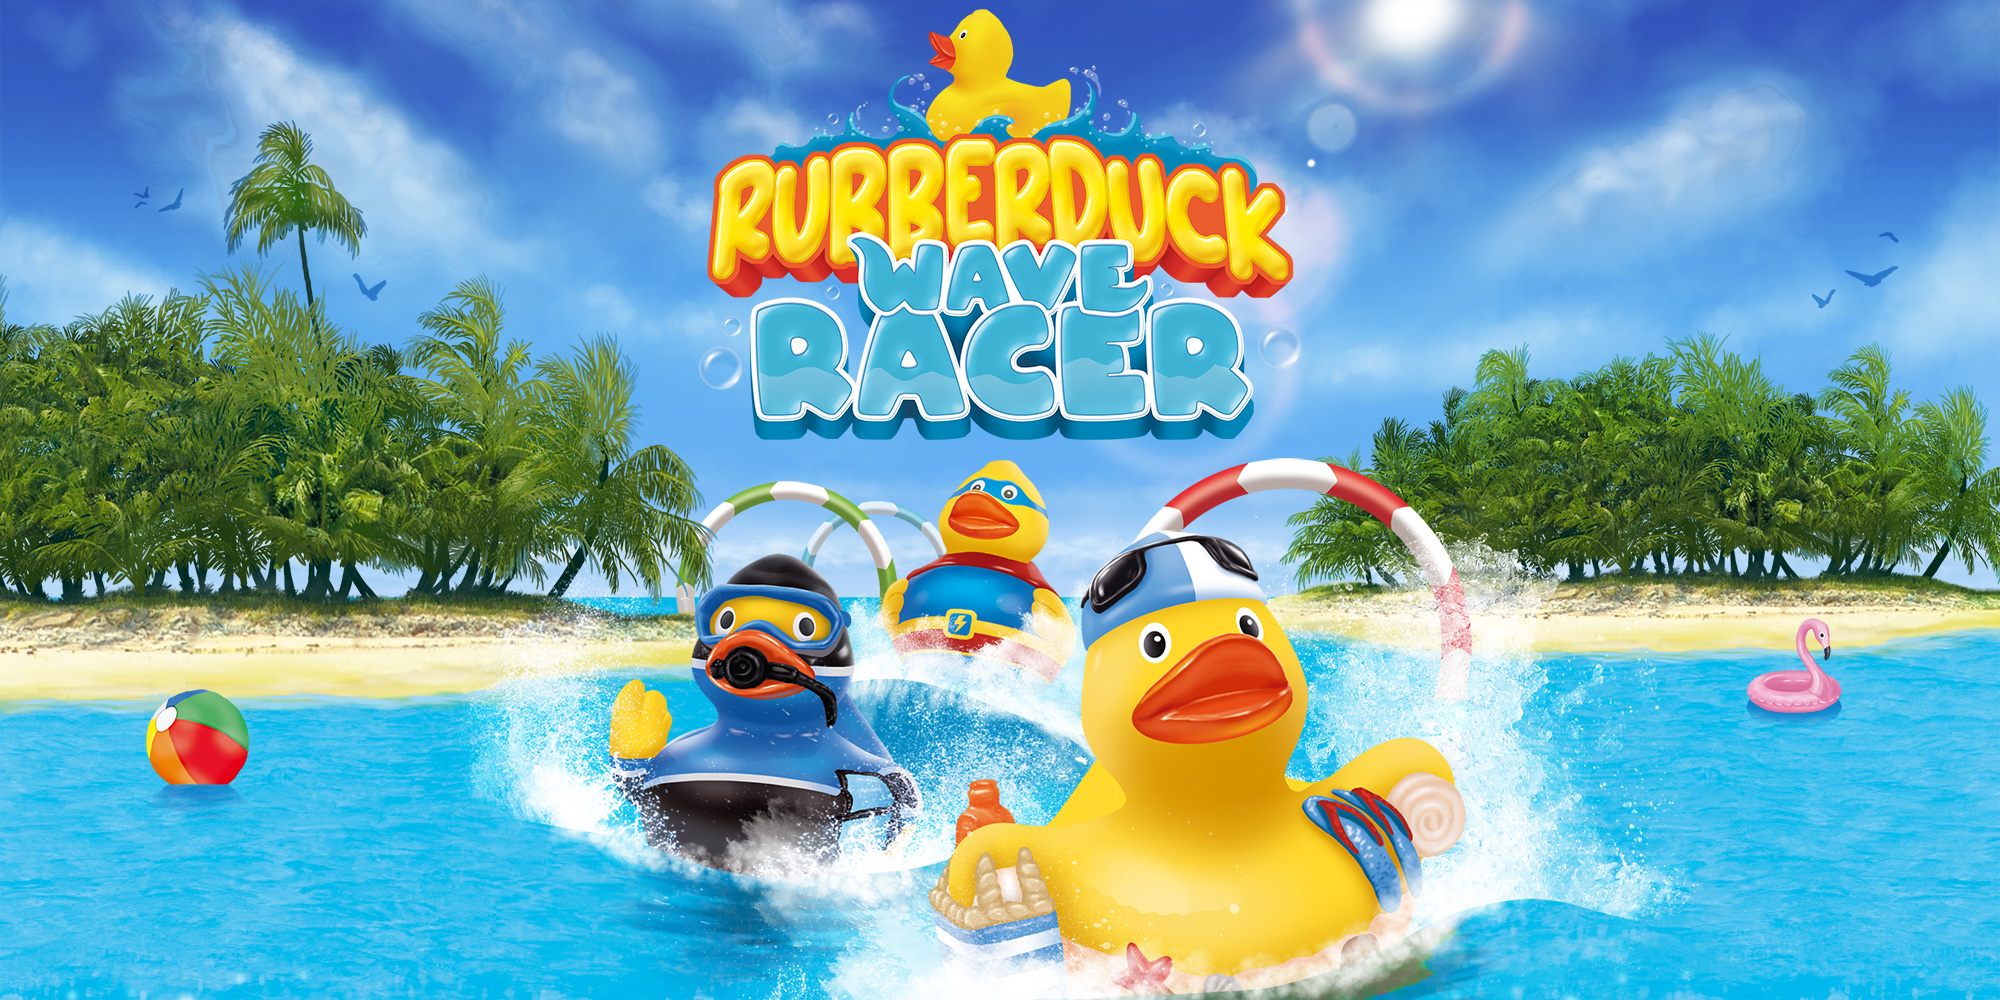 Image of Rubberduck Wave Racer